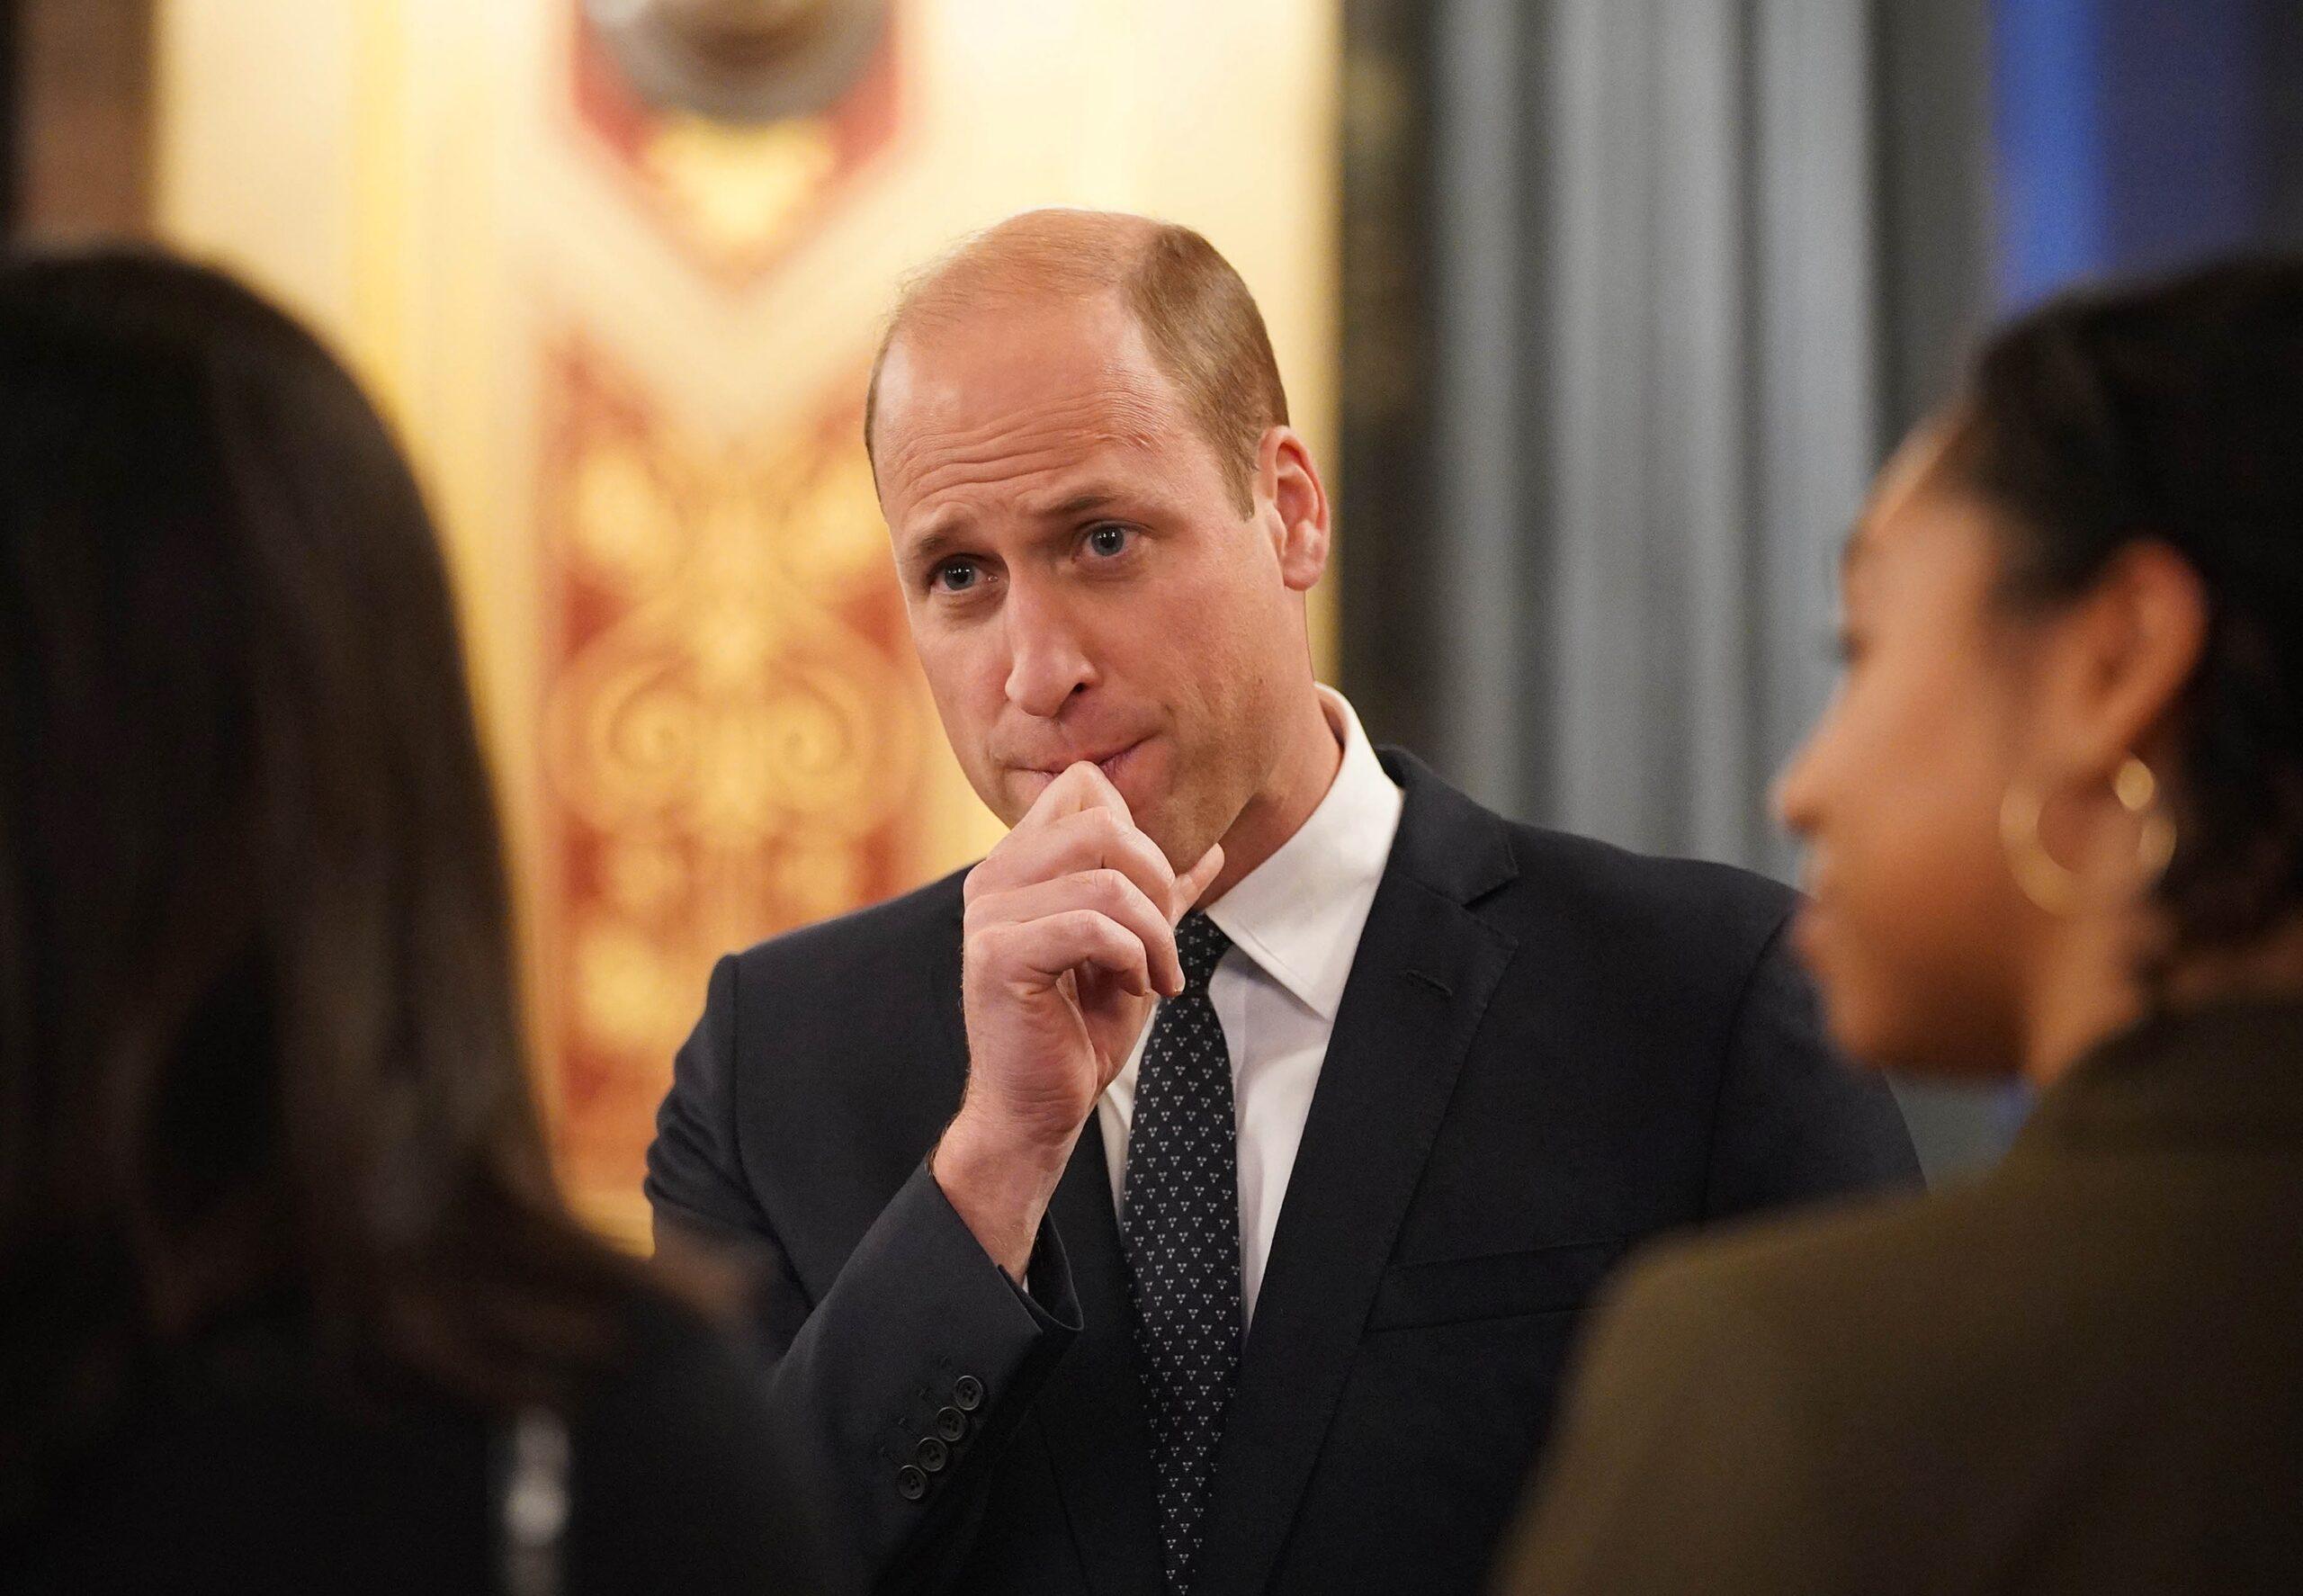 The Duke of Cambridge attends a reception of the Joint Ministerial Council